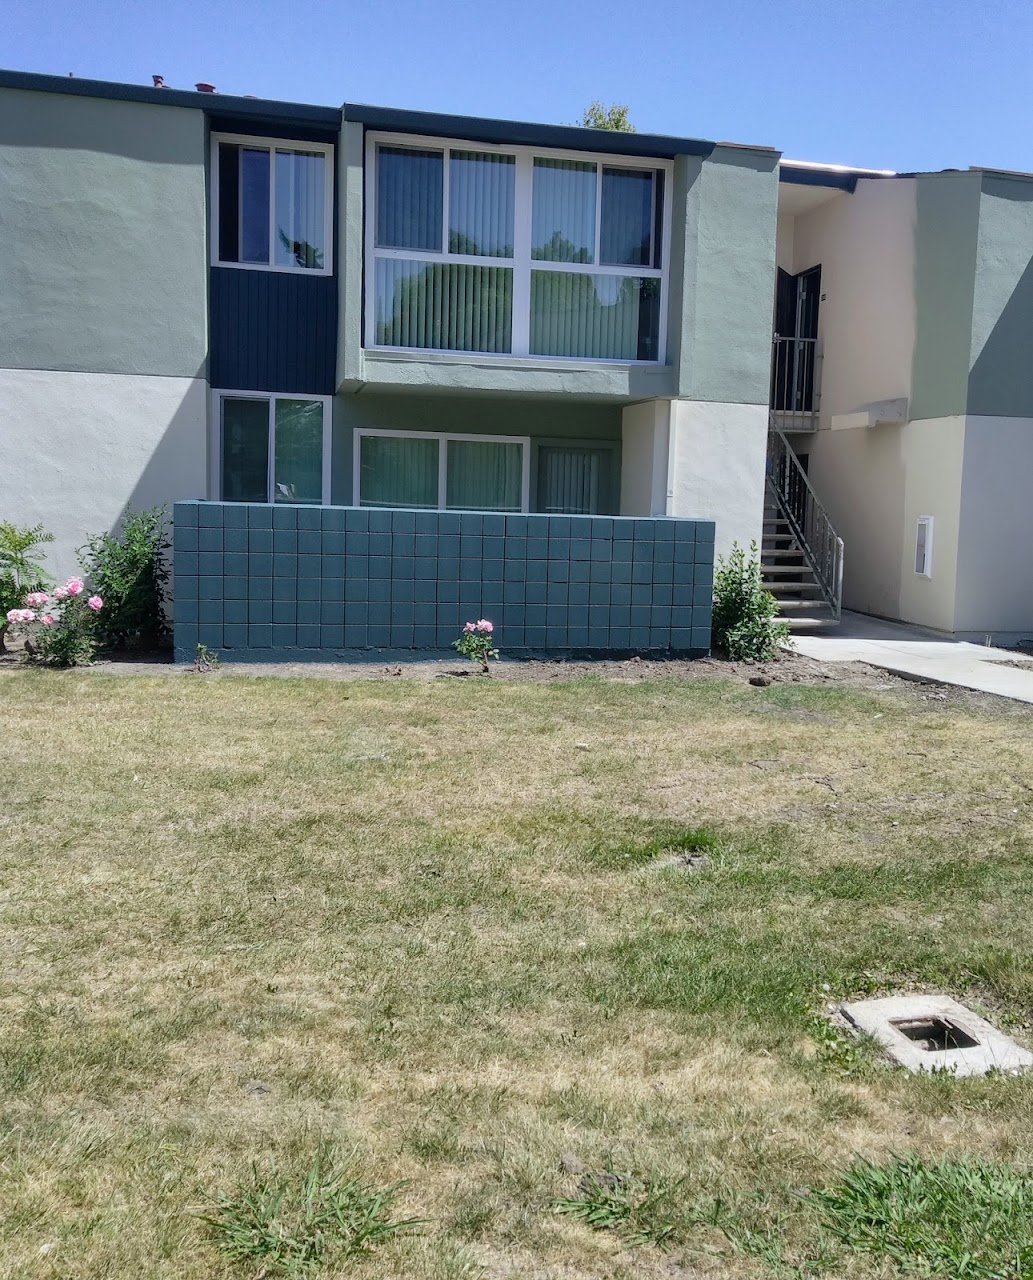 Photo of EL RANCHO VERDE APTS. Affordable housing located at 303 CHECKERS DR SAN JOSE, CA 95133